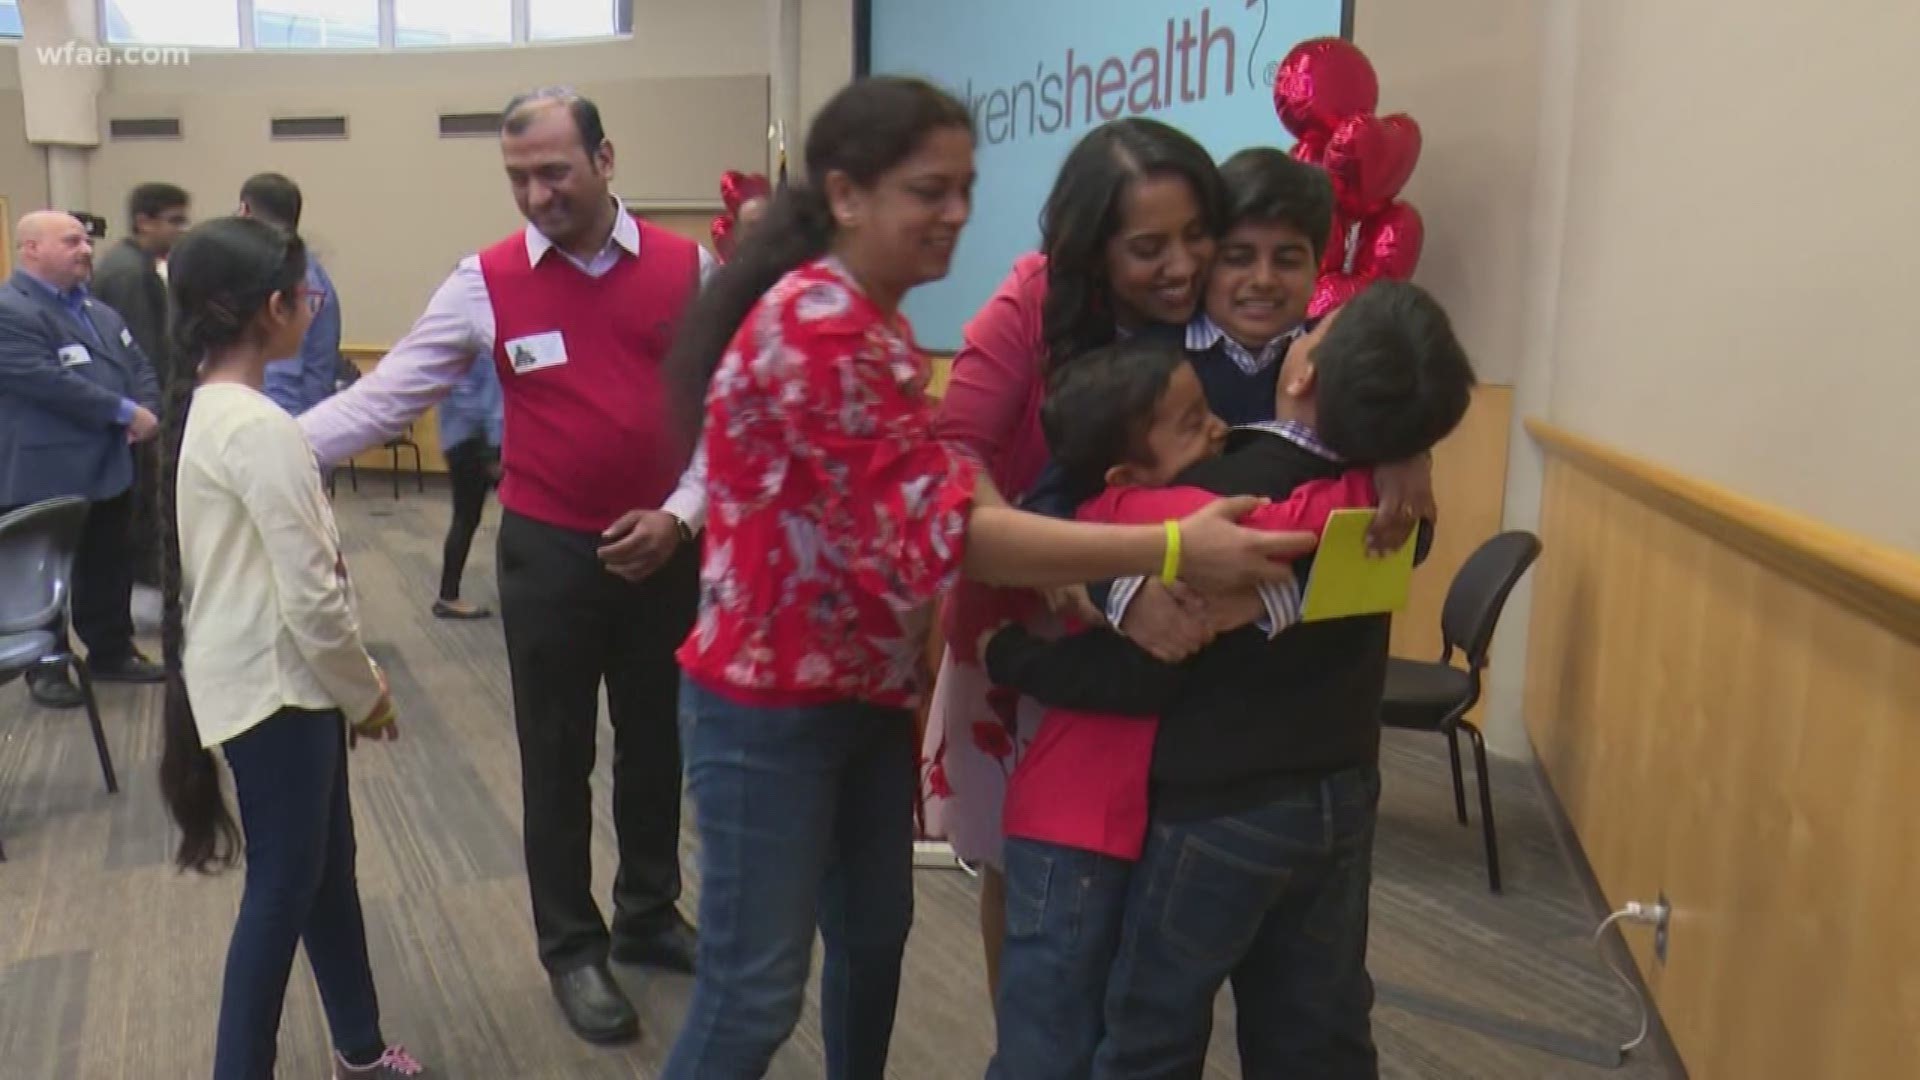 A world-wide search for a life-saving donor finds a match just on the other side of Dallas.